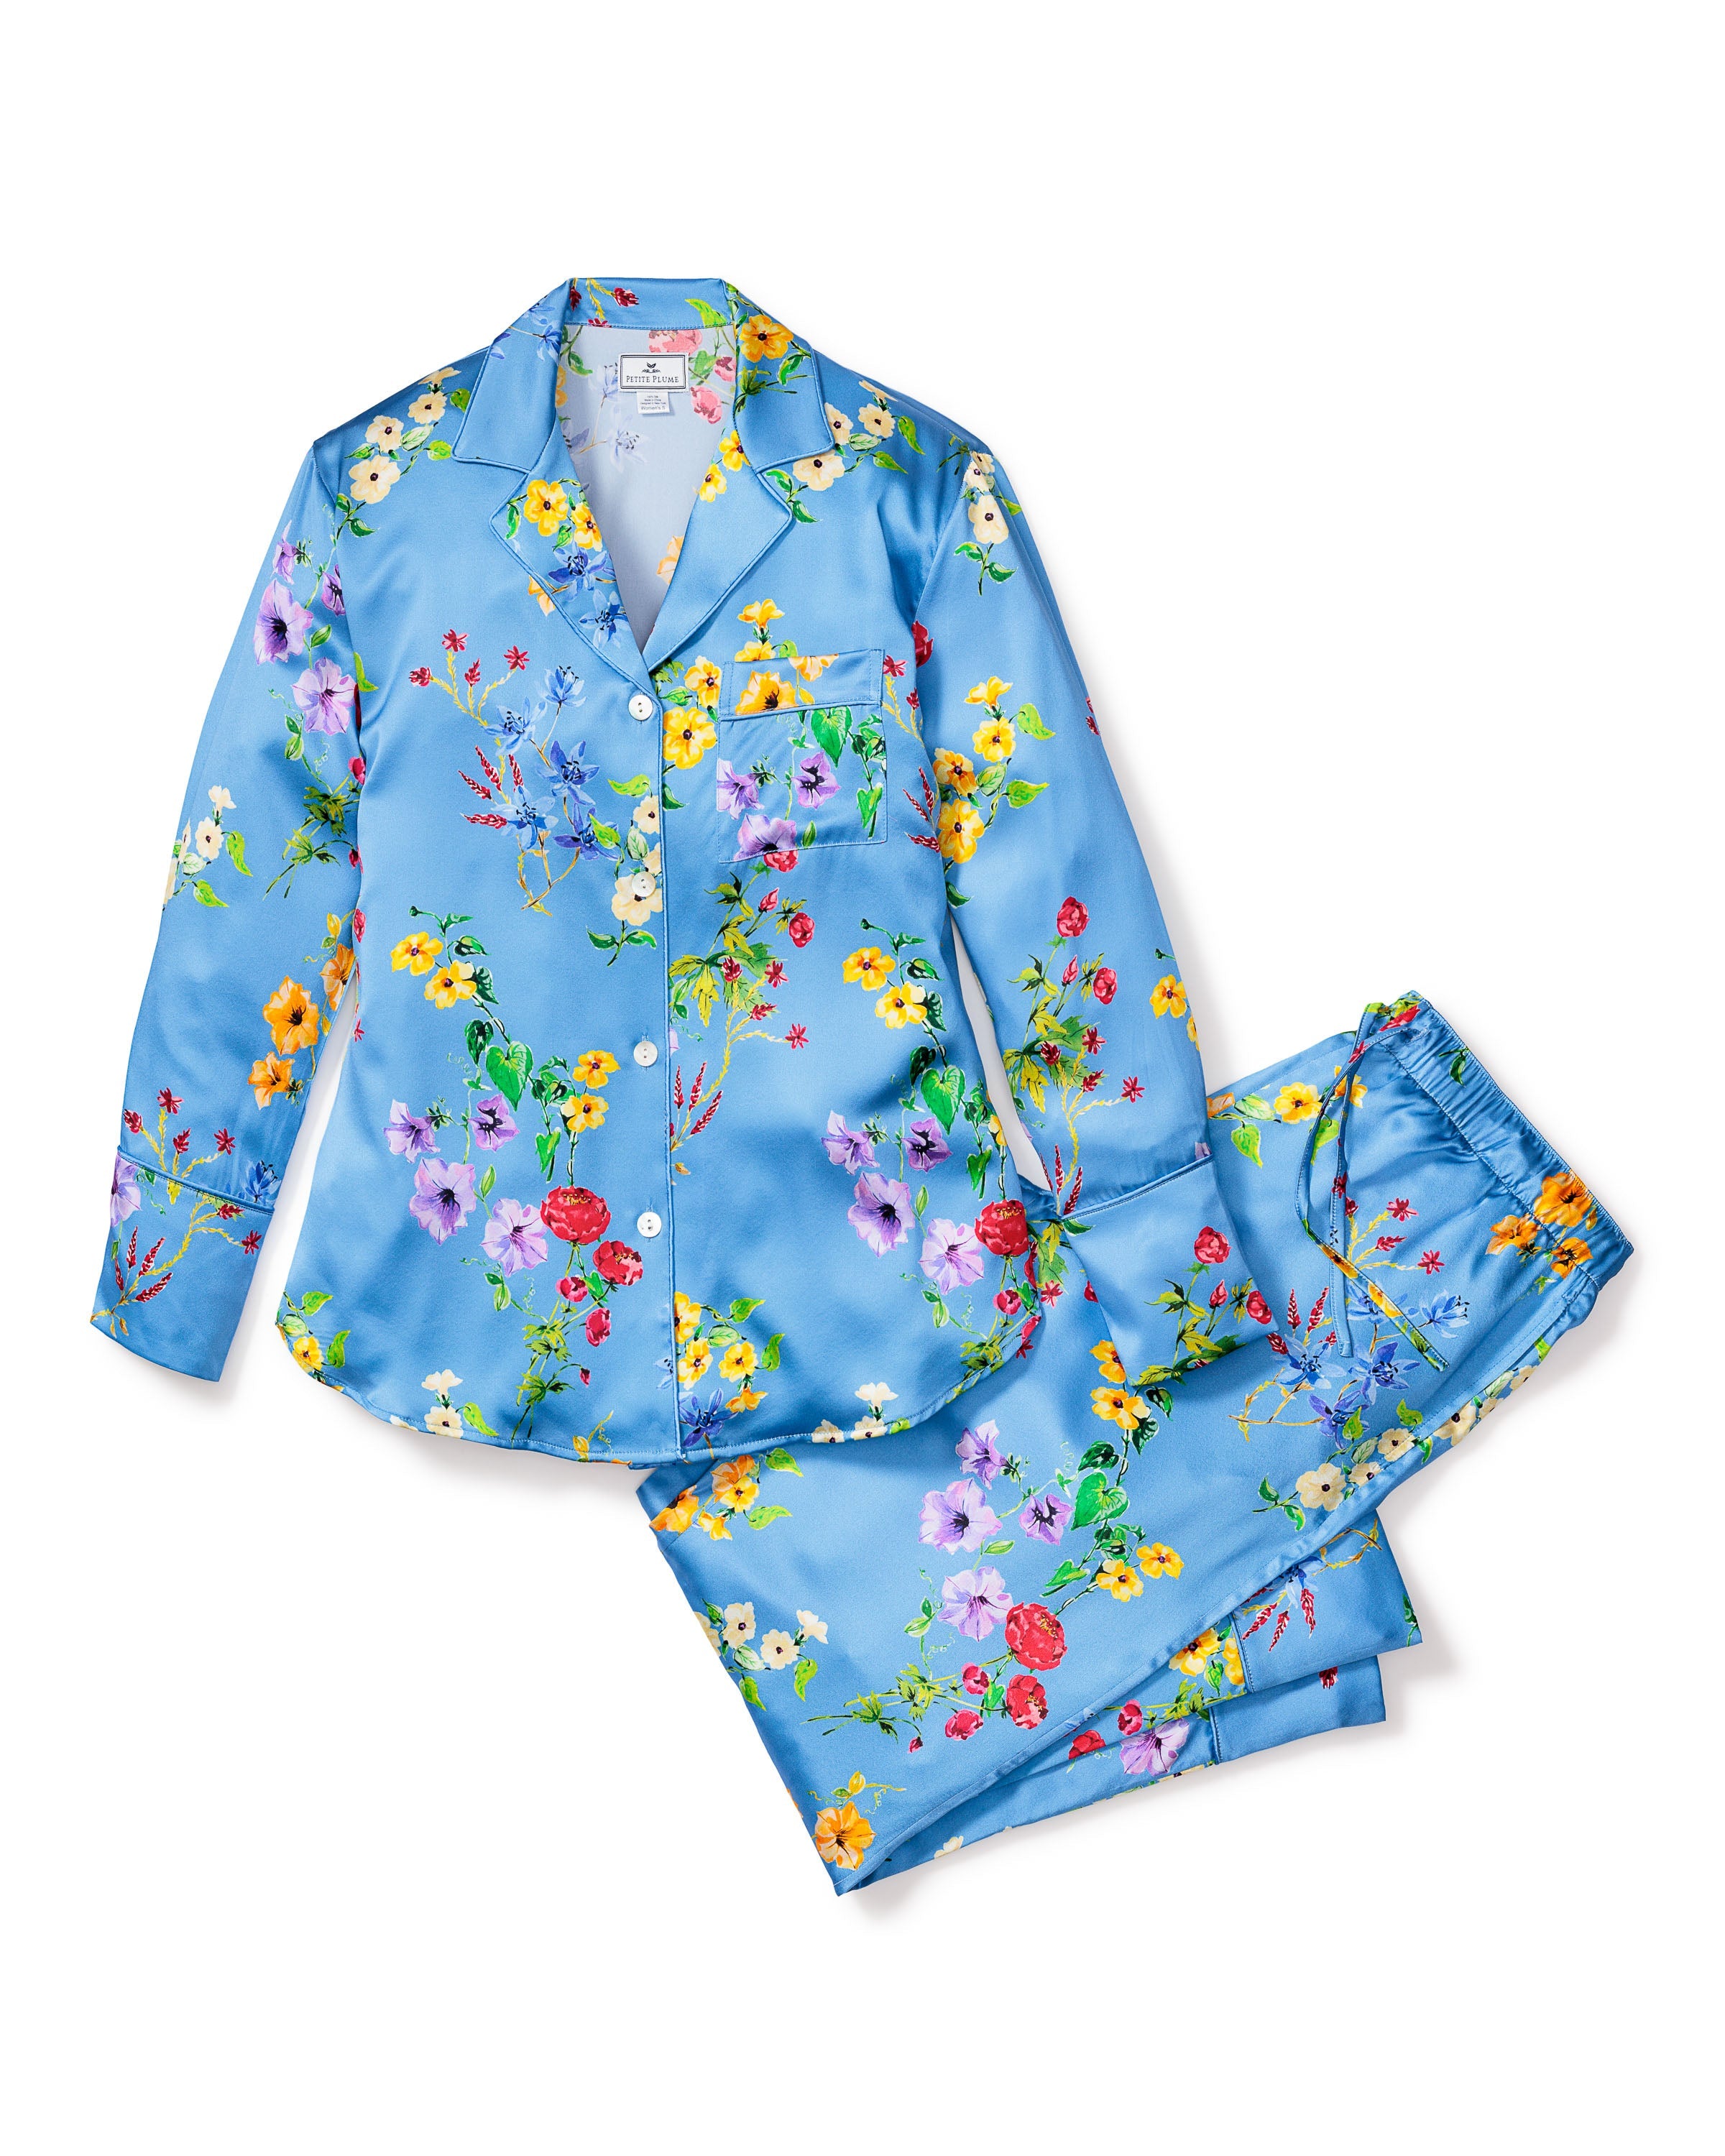 Kid's Flannel Robe in Navy with White Piping – Petite Plume